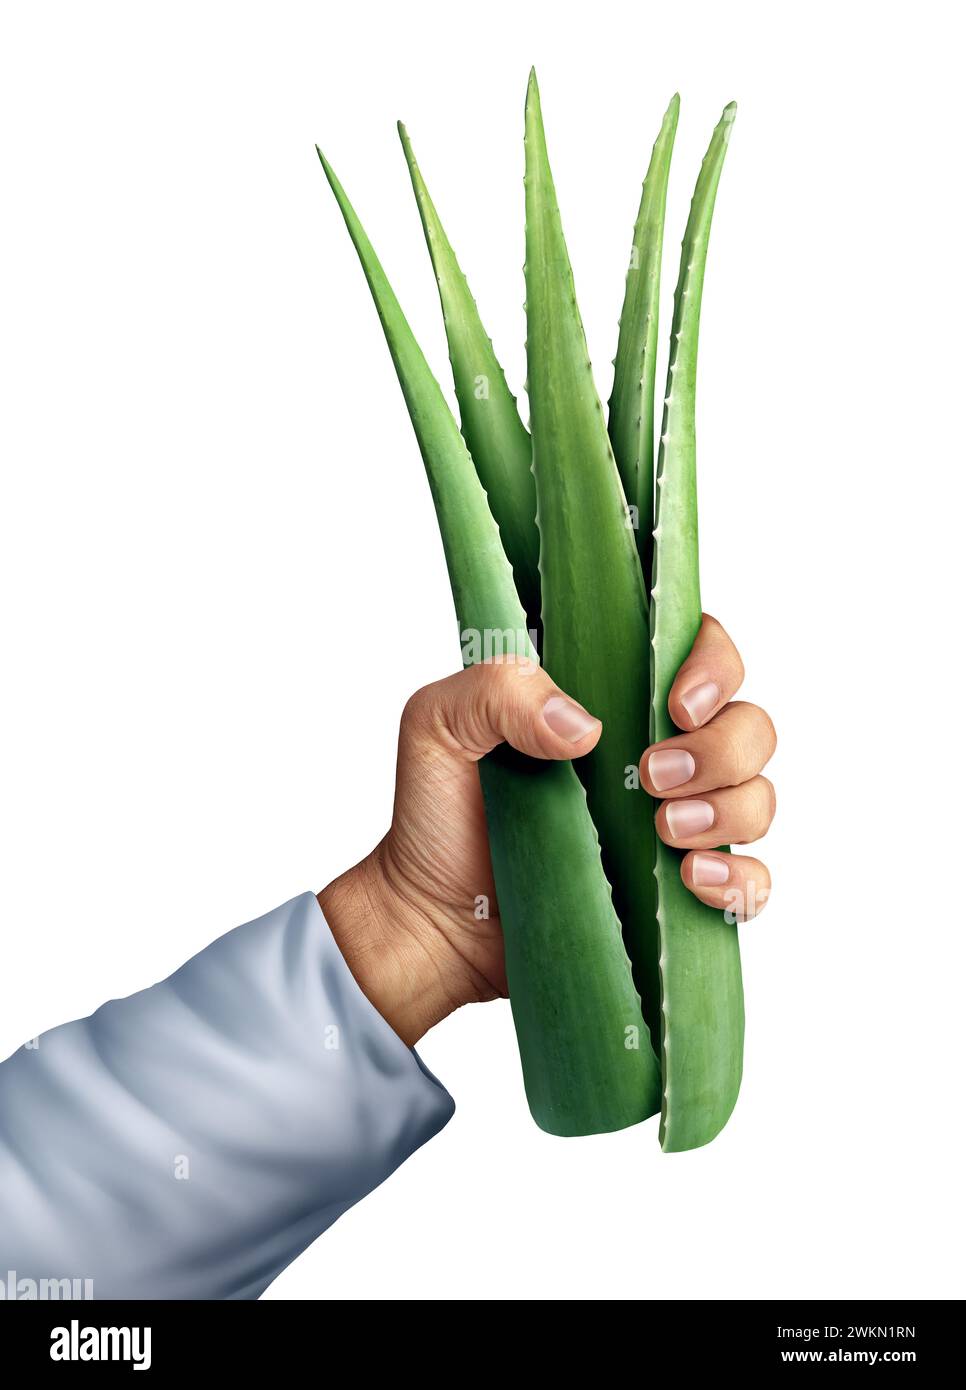 Holding a bunch of Aloe Vera leaves as a medicinal Succulent plant with Anti-inflammatory healing properties and as a herbal remedy detoxification Stock Photo